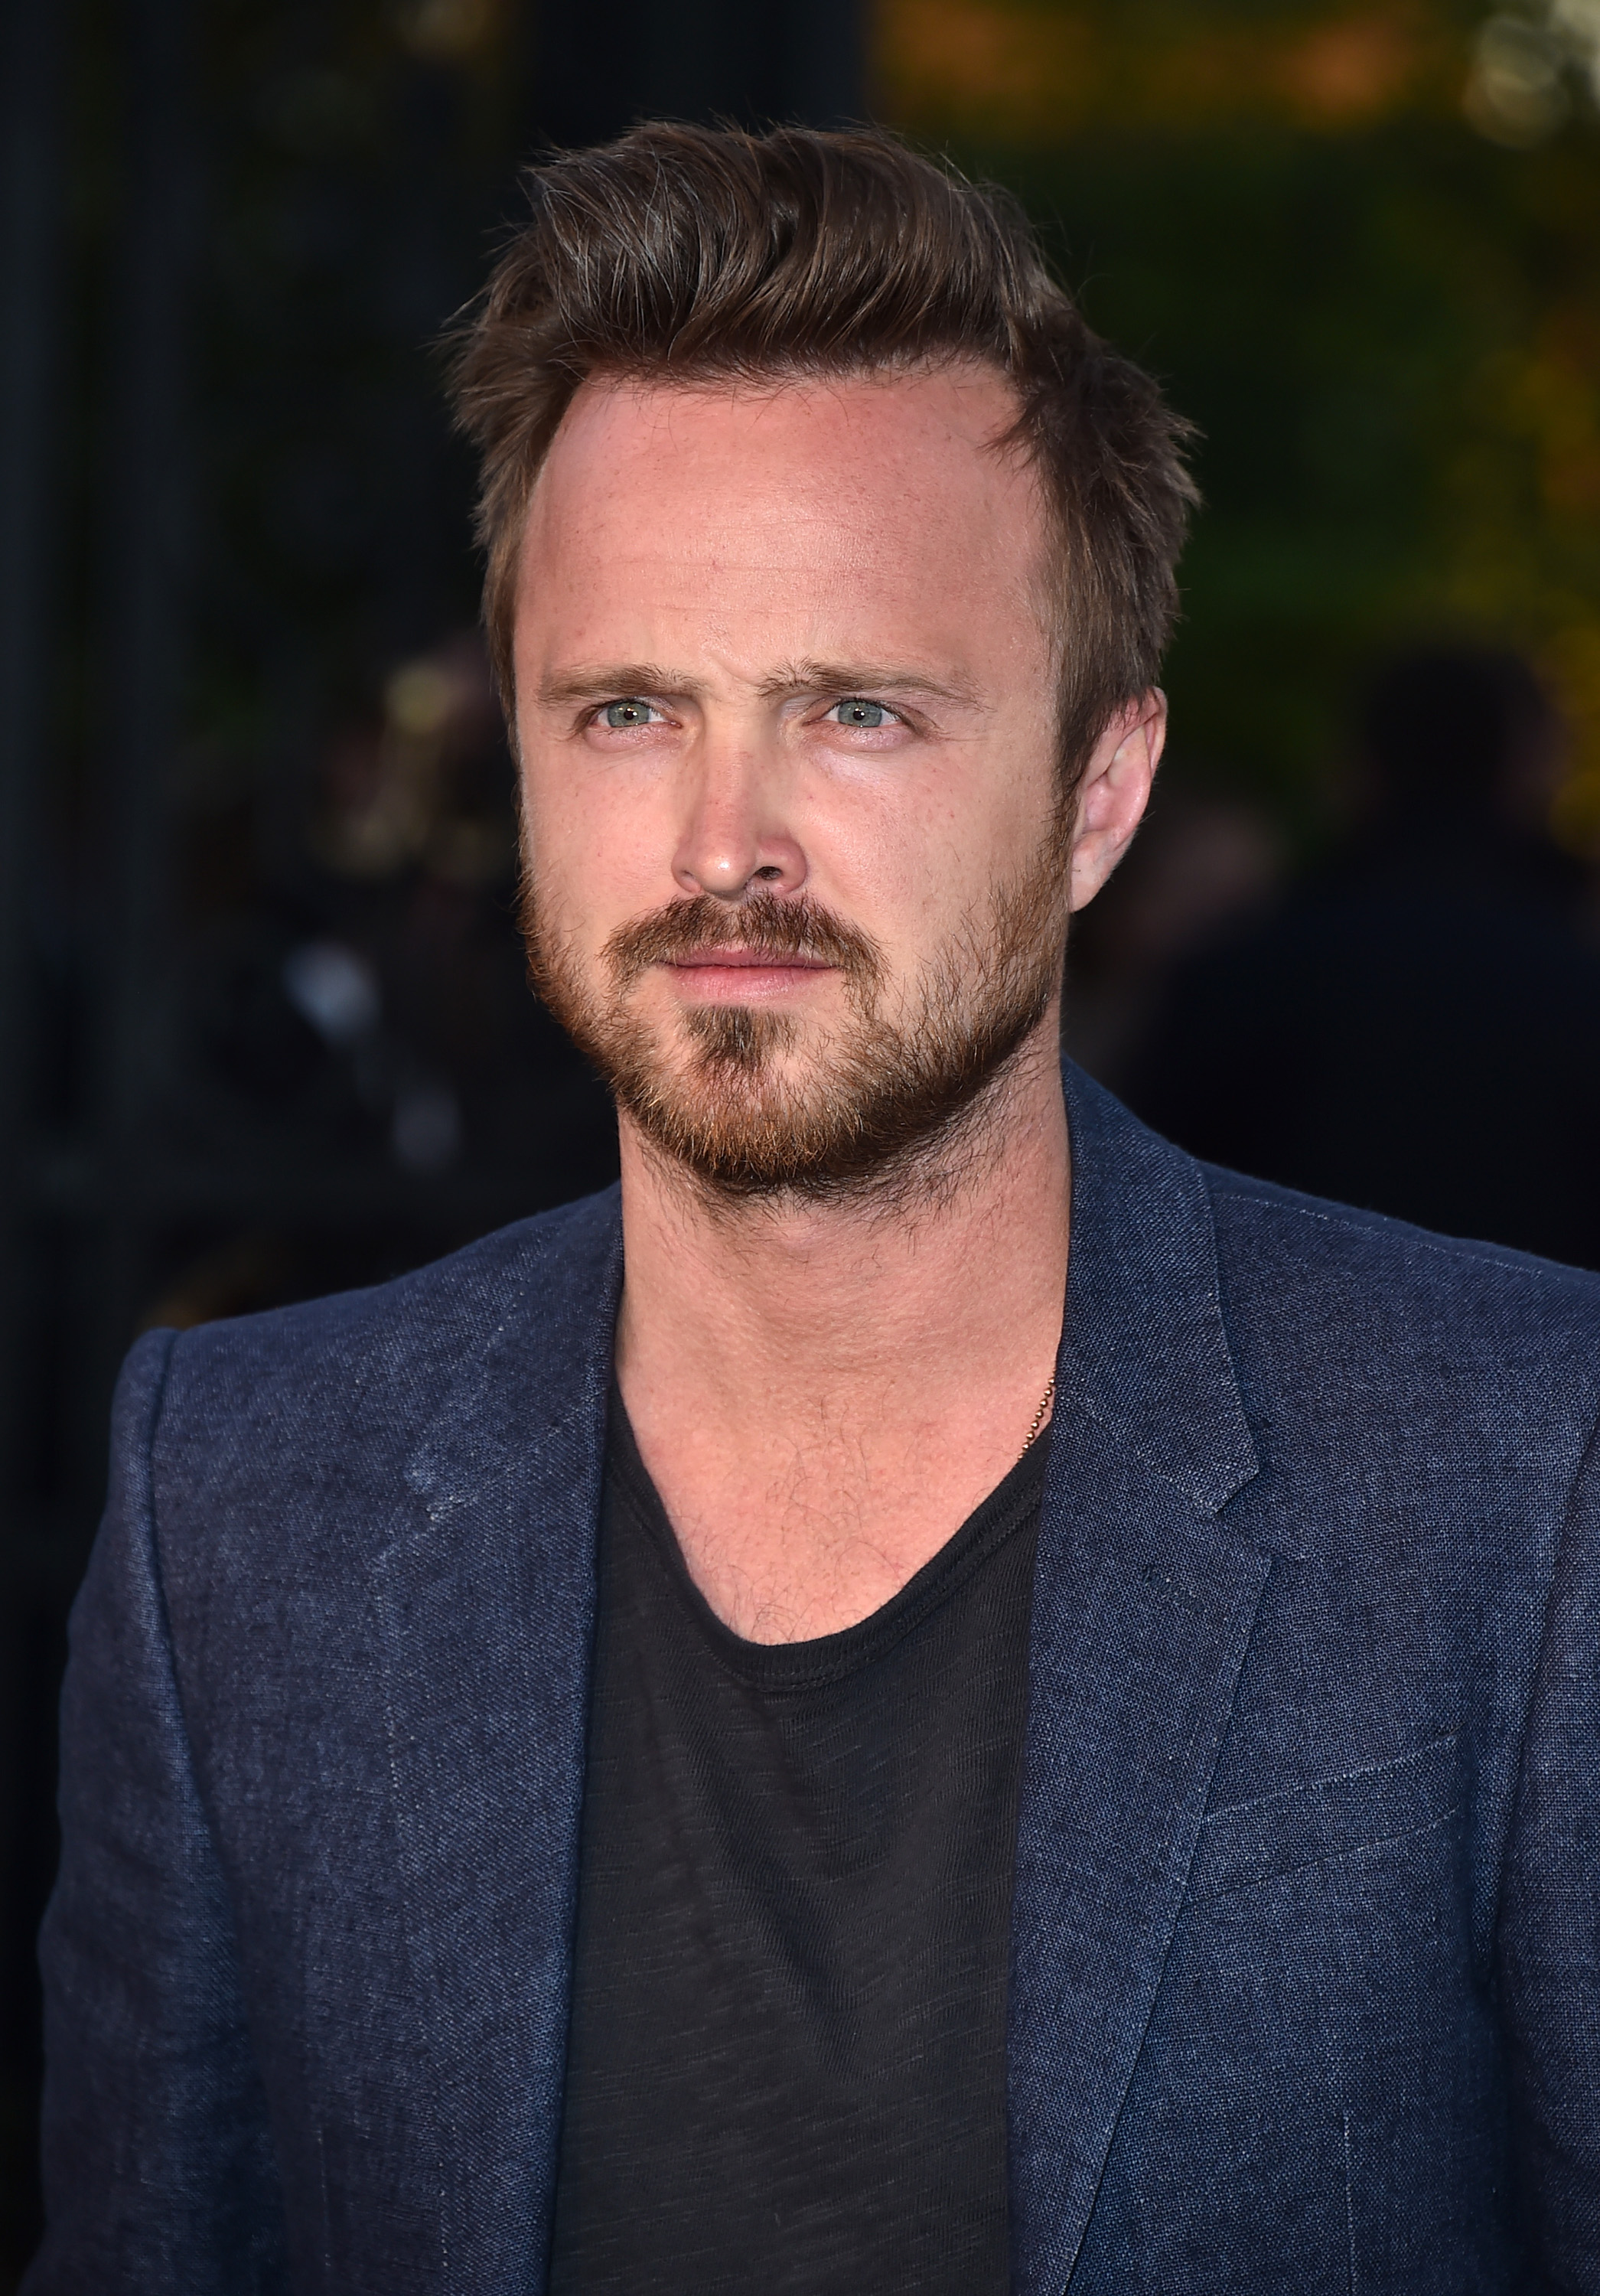 Aaron Paul at Burberry's "London in Los Angeles" event in London on April 16, 2015. (Jordan Strauss—Invision/AP)